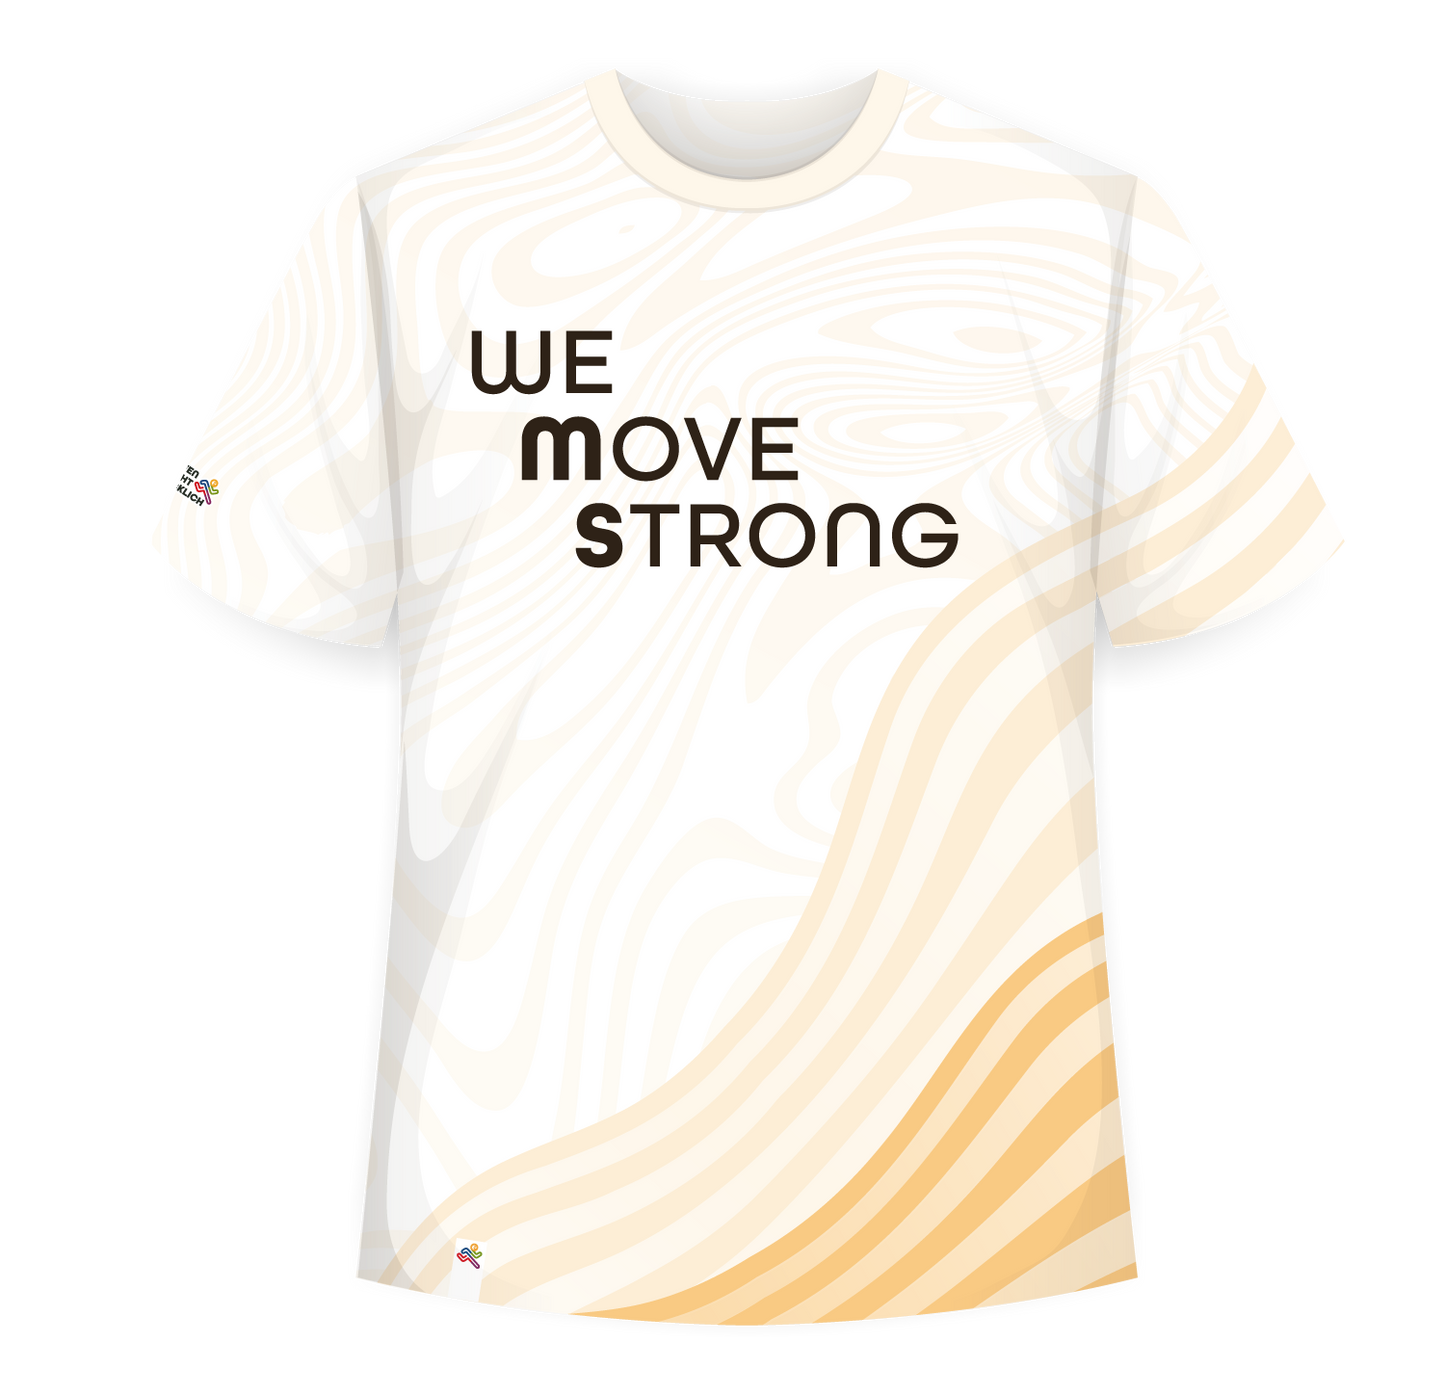 Kids-Shirt "Move For MS" (2023)